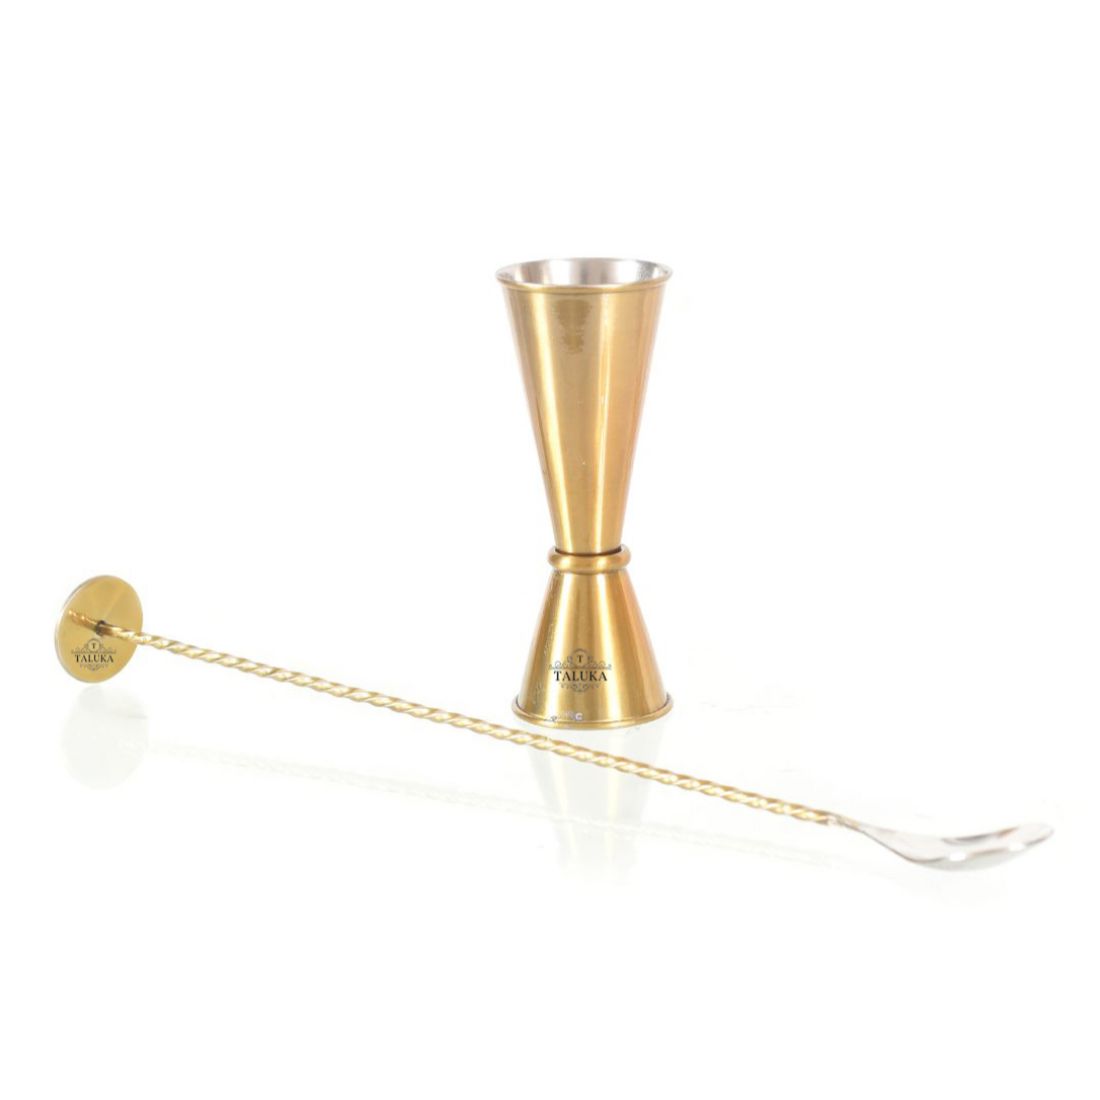 Stainless Steel Gold Plated 6 Pcs Bar Set | Cocktail Shaker 750 ml | Ice Bucket Double Wall 1500 ML | Peg Measure | Wine Cooler | Bar Spoon | Serving Tray for Bar Home Hotel Restaurant